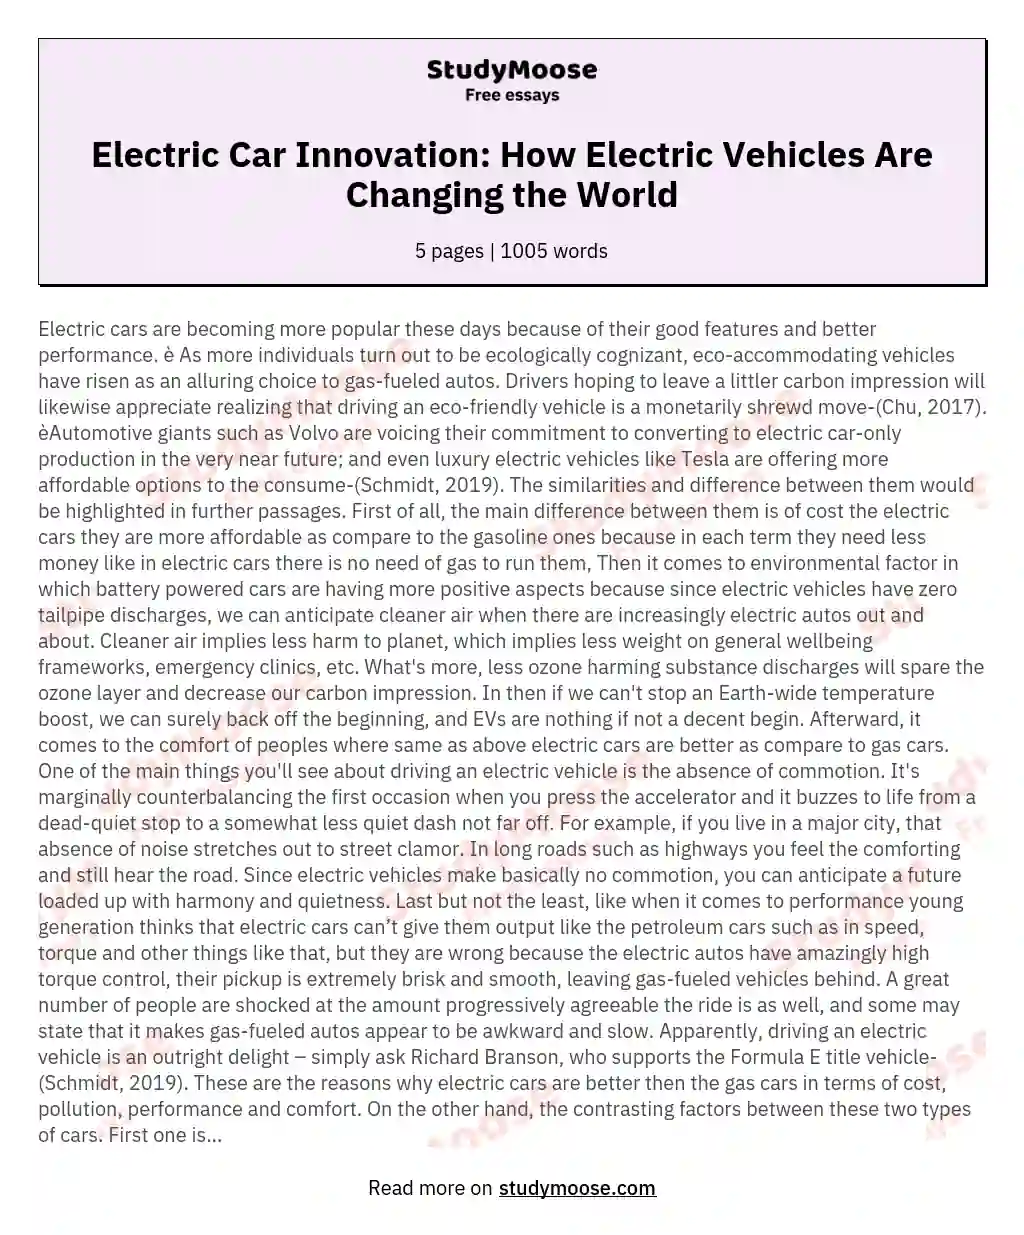 Electric Car Innovation: How Electric Vehicles Are Changing the World